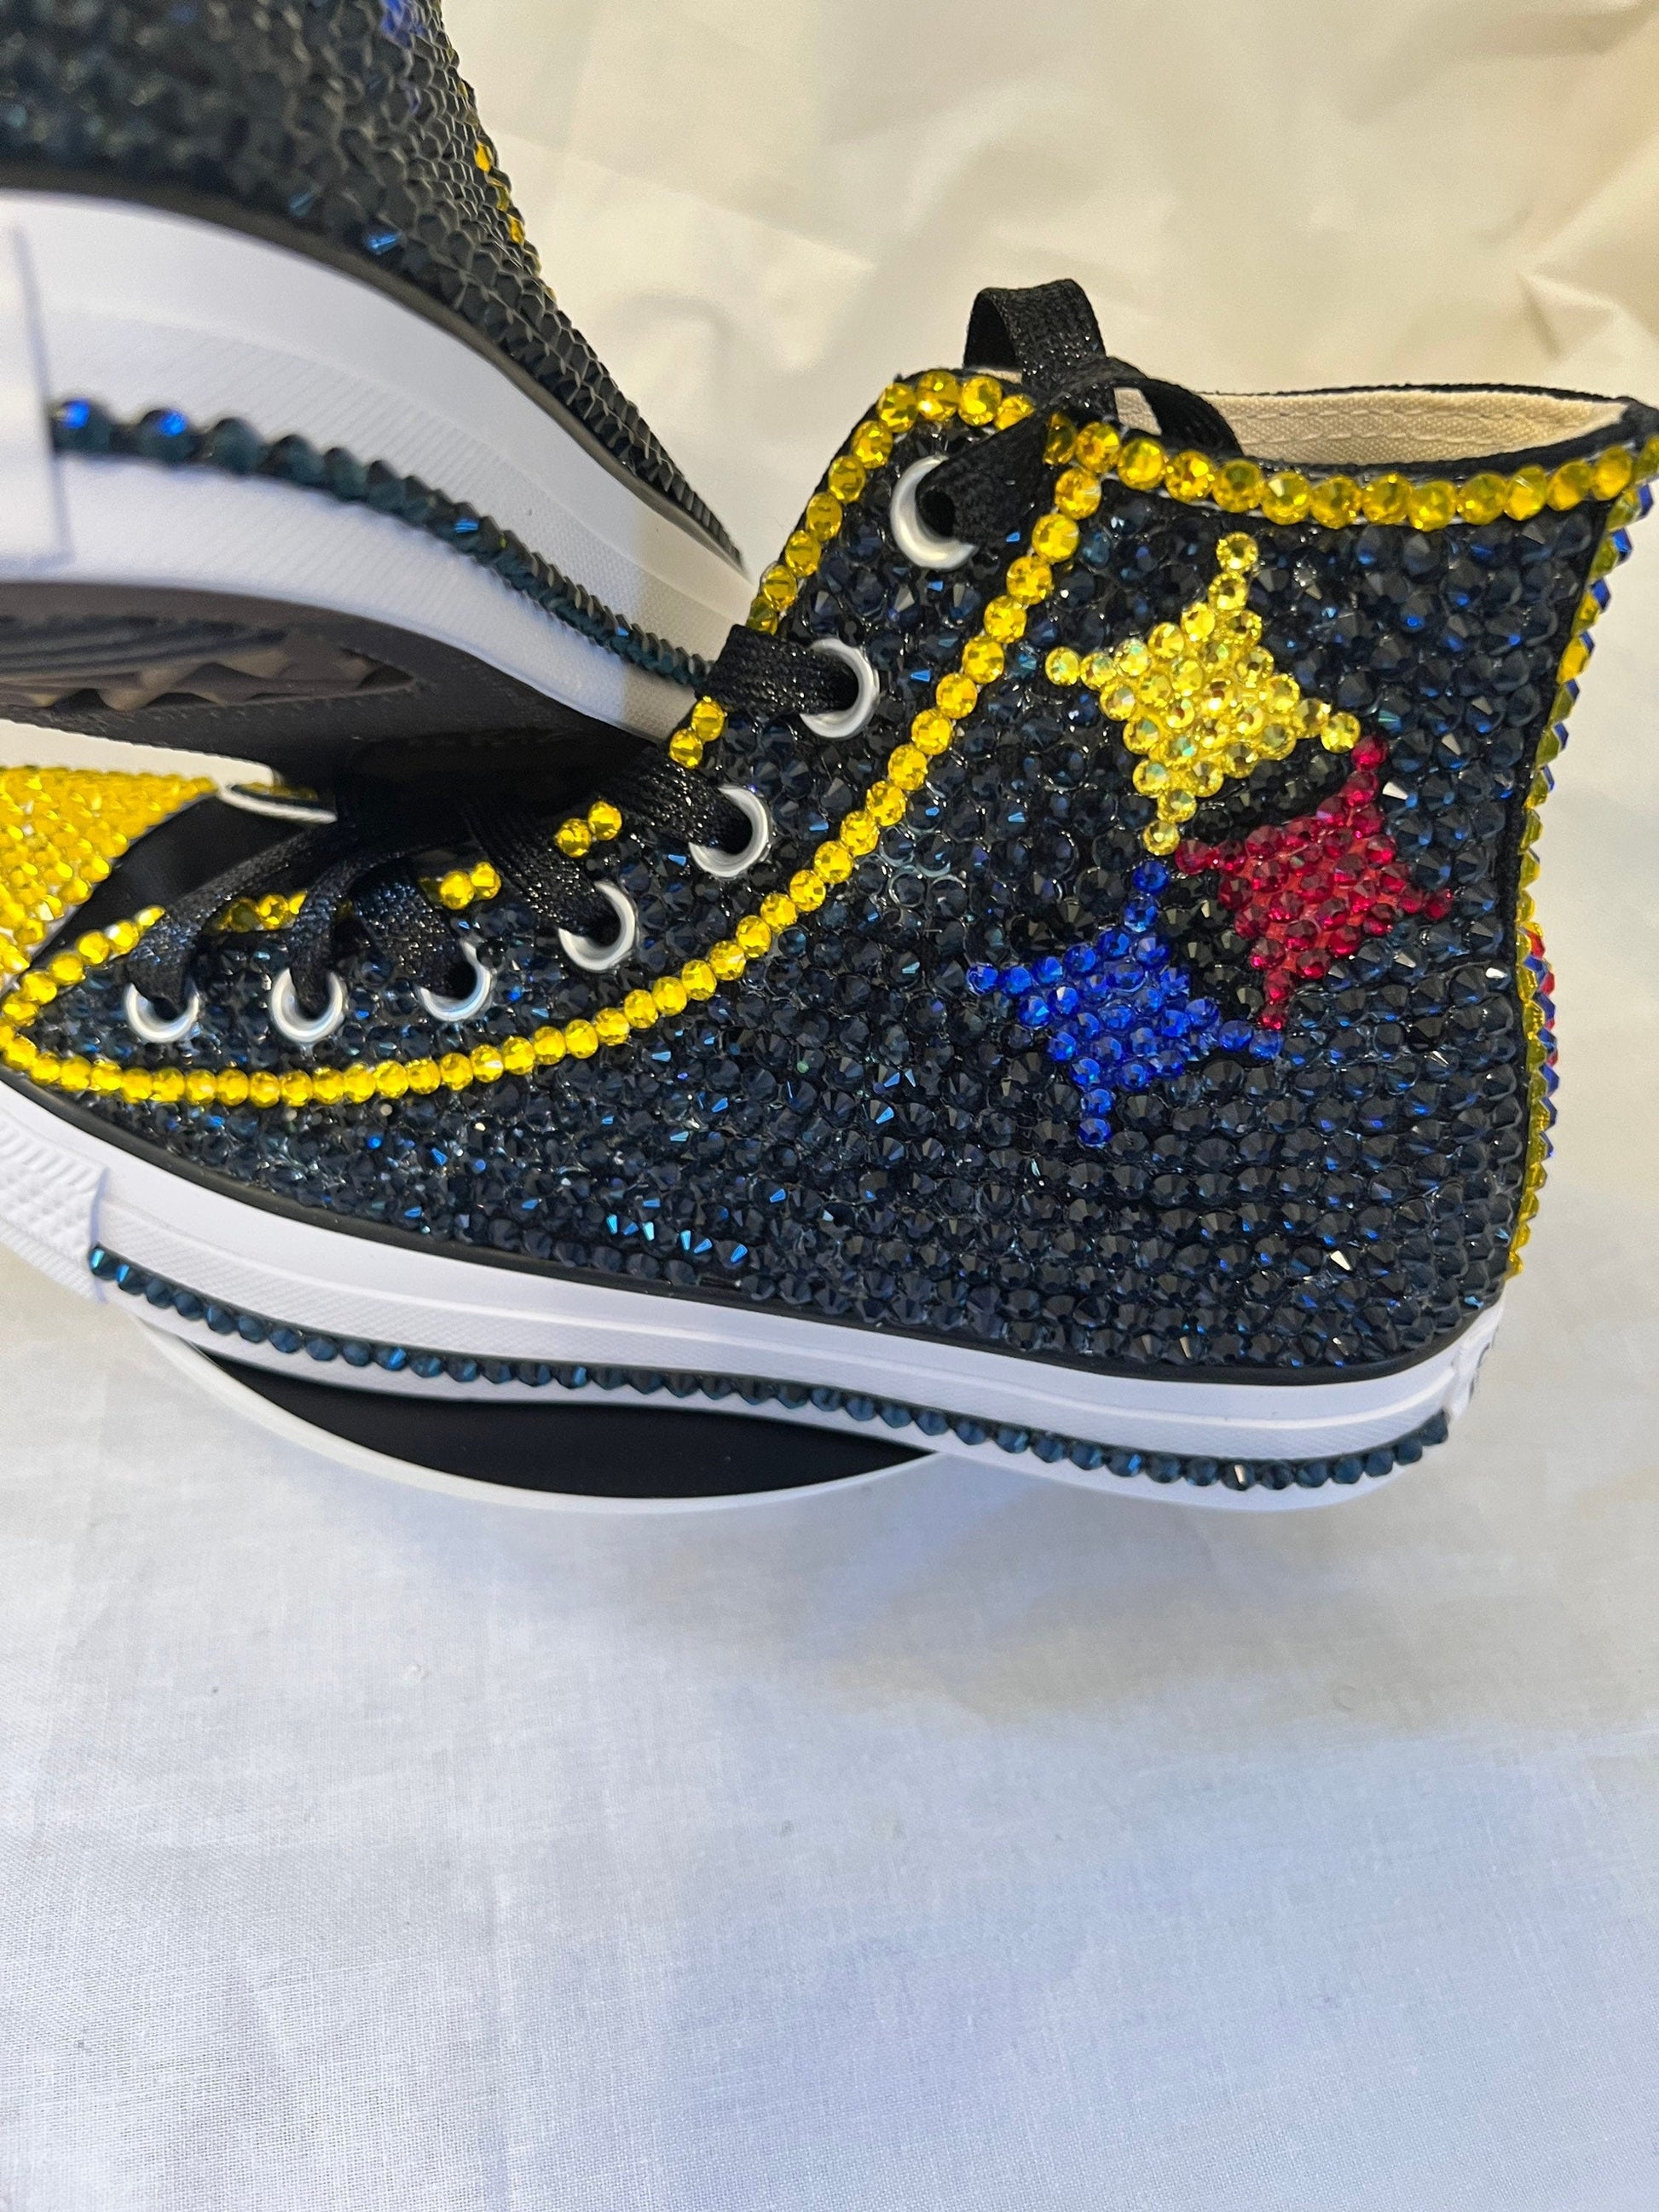 Professional or College Tennis Shoes, converse, wedding, quinceanera, bling shoes